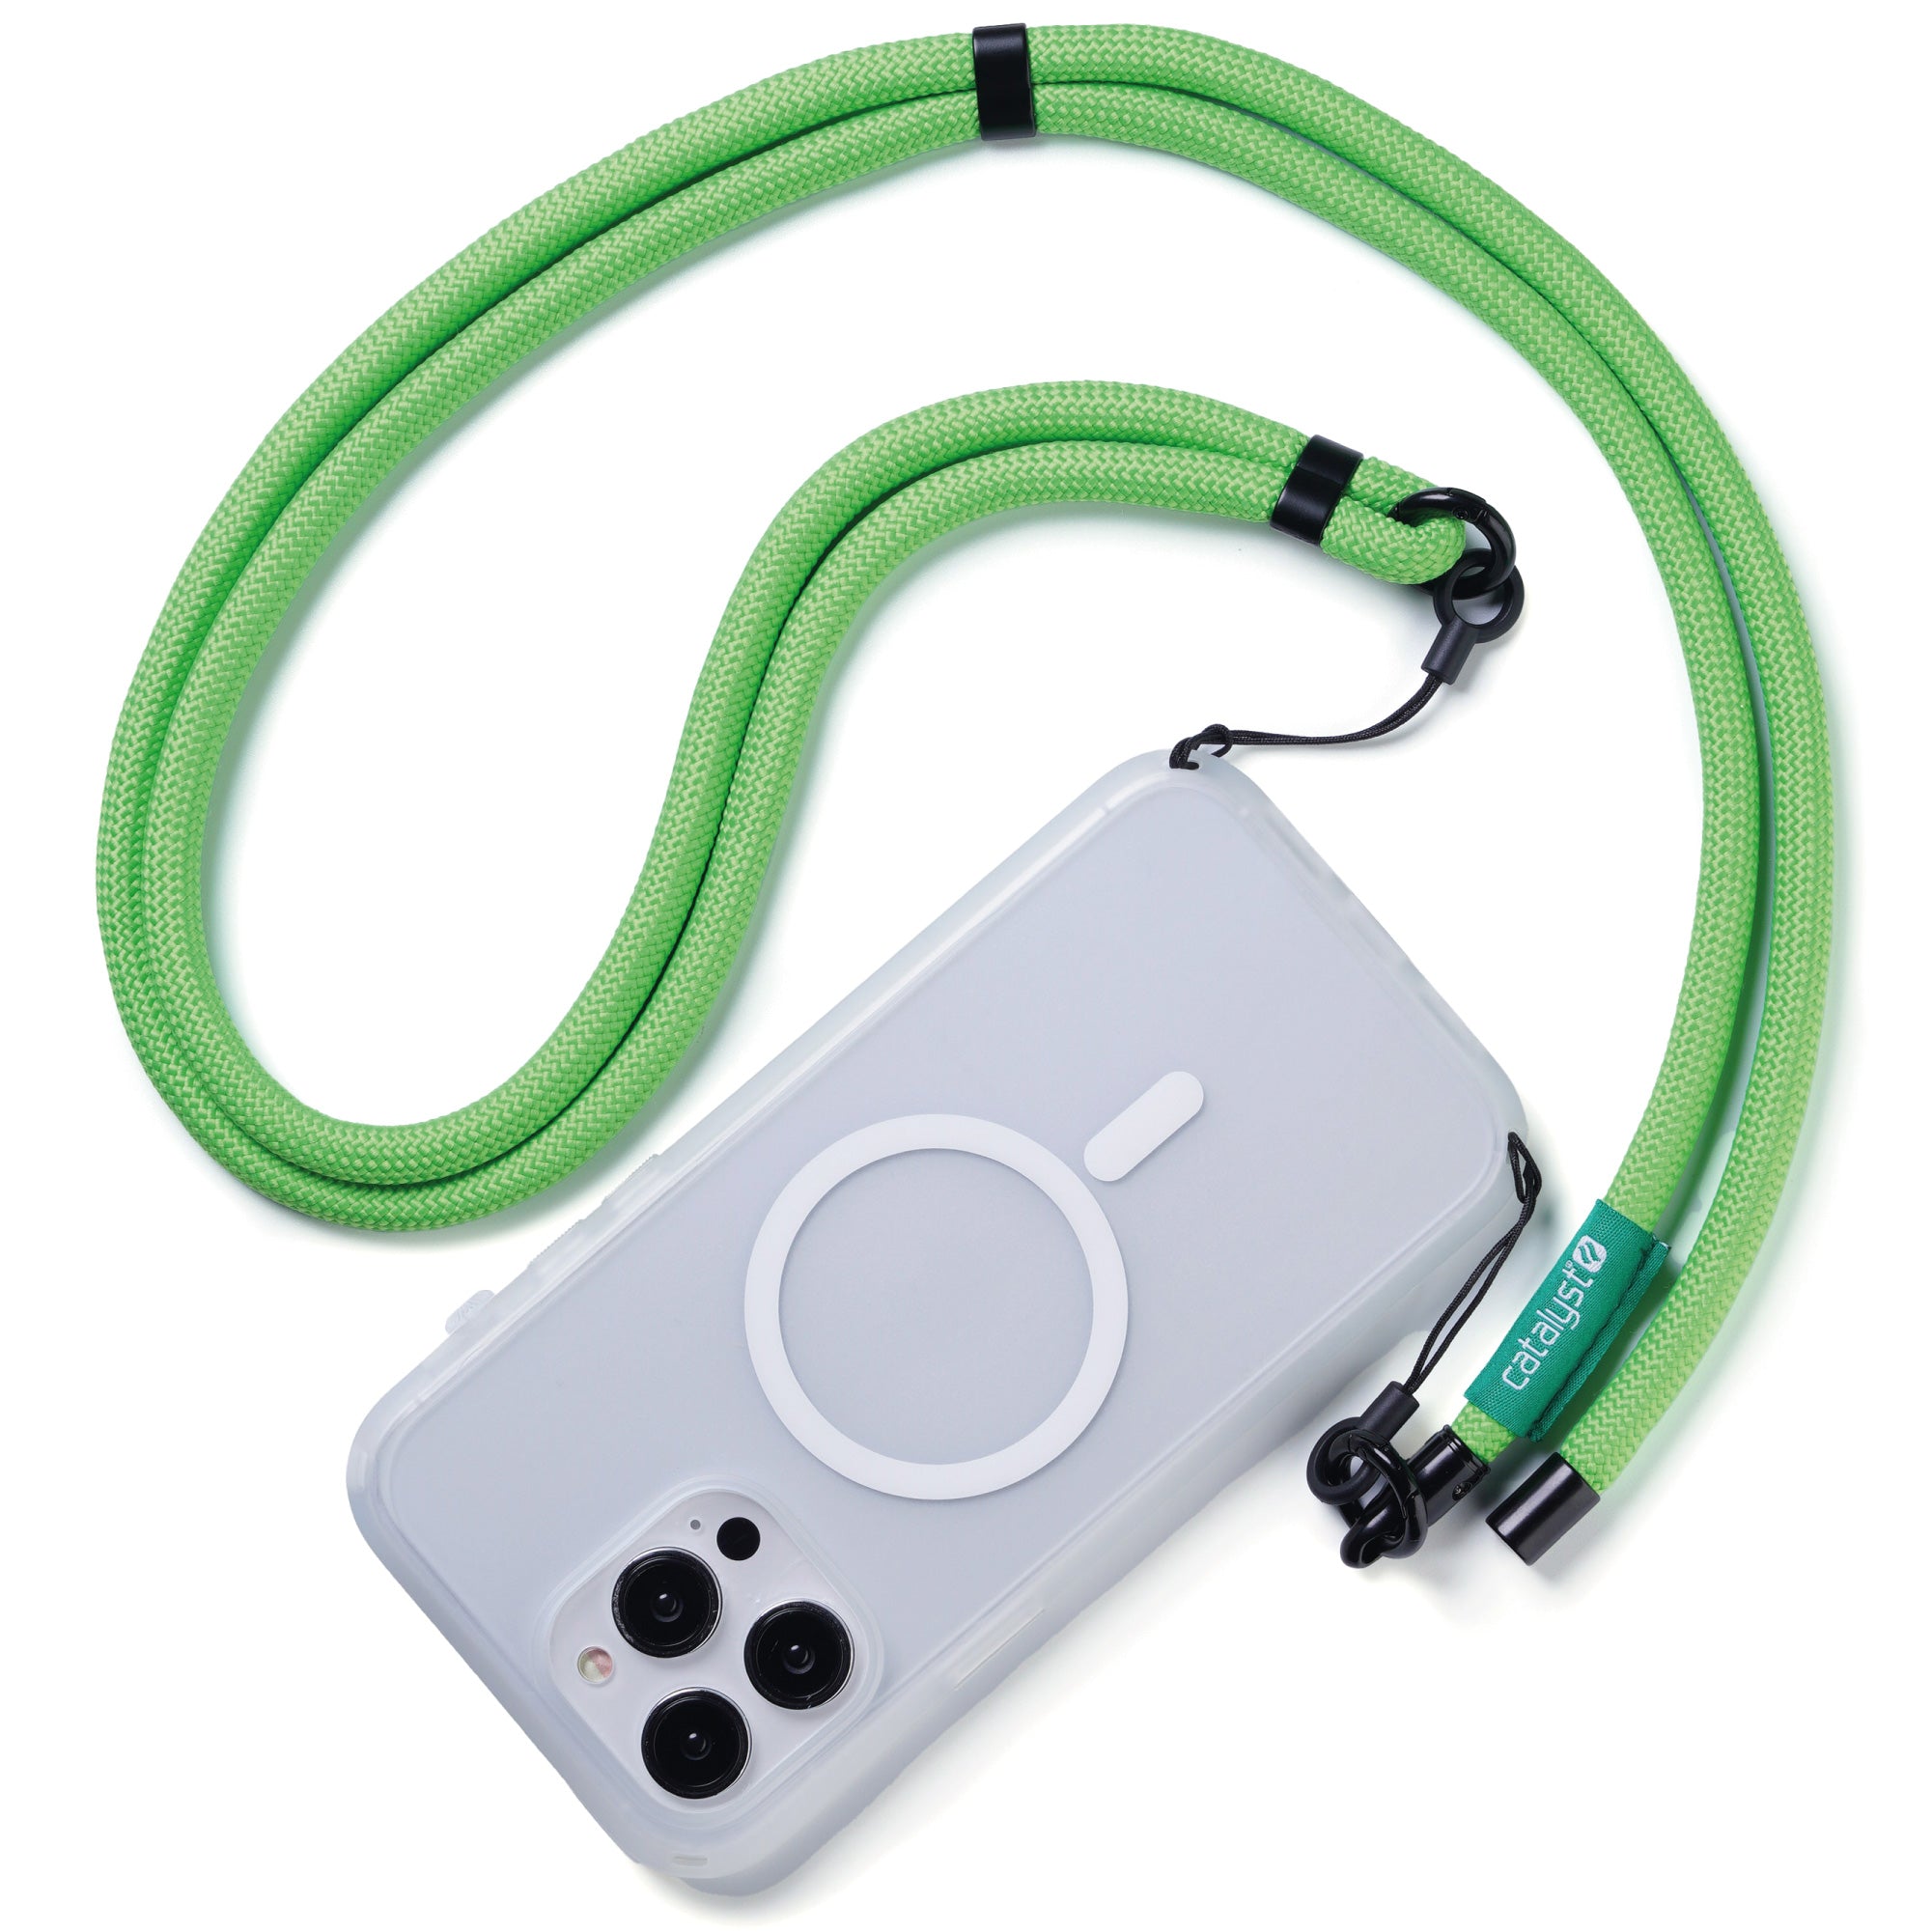 CATNECKLANGRN-FBA | Catalyst-Crossbody-Shoulder-Strap-attached-to-Influence-Case-MagSafe-Compatible-for-iPhone-Hero-Listing-Neon-Green